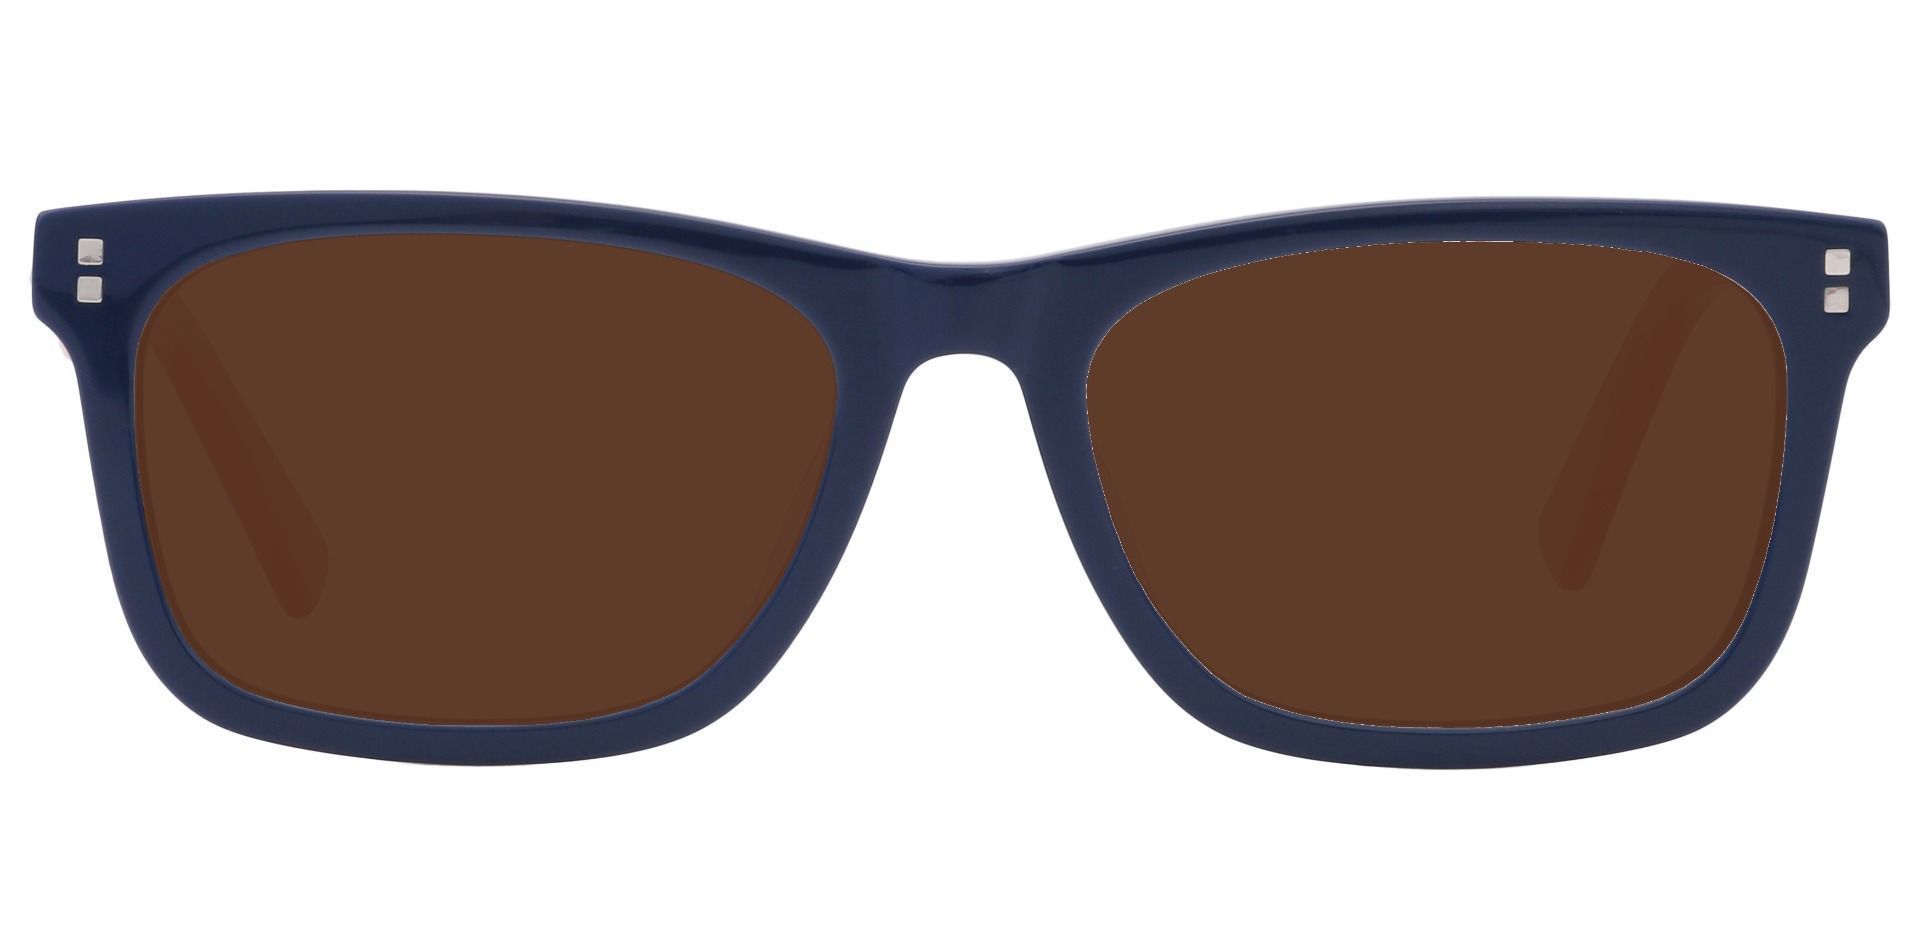 Newbury Rectangle Reading Sunglasses - Blue Frame With Brown Lenses